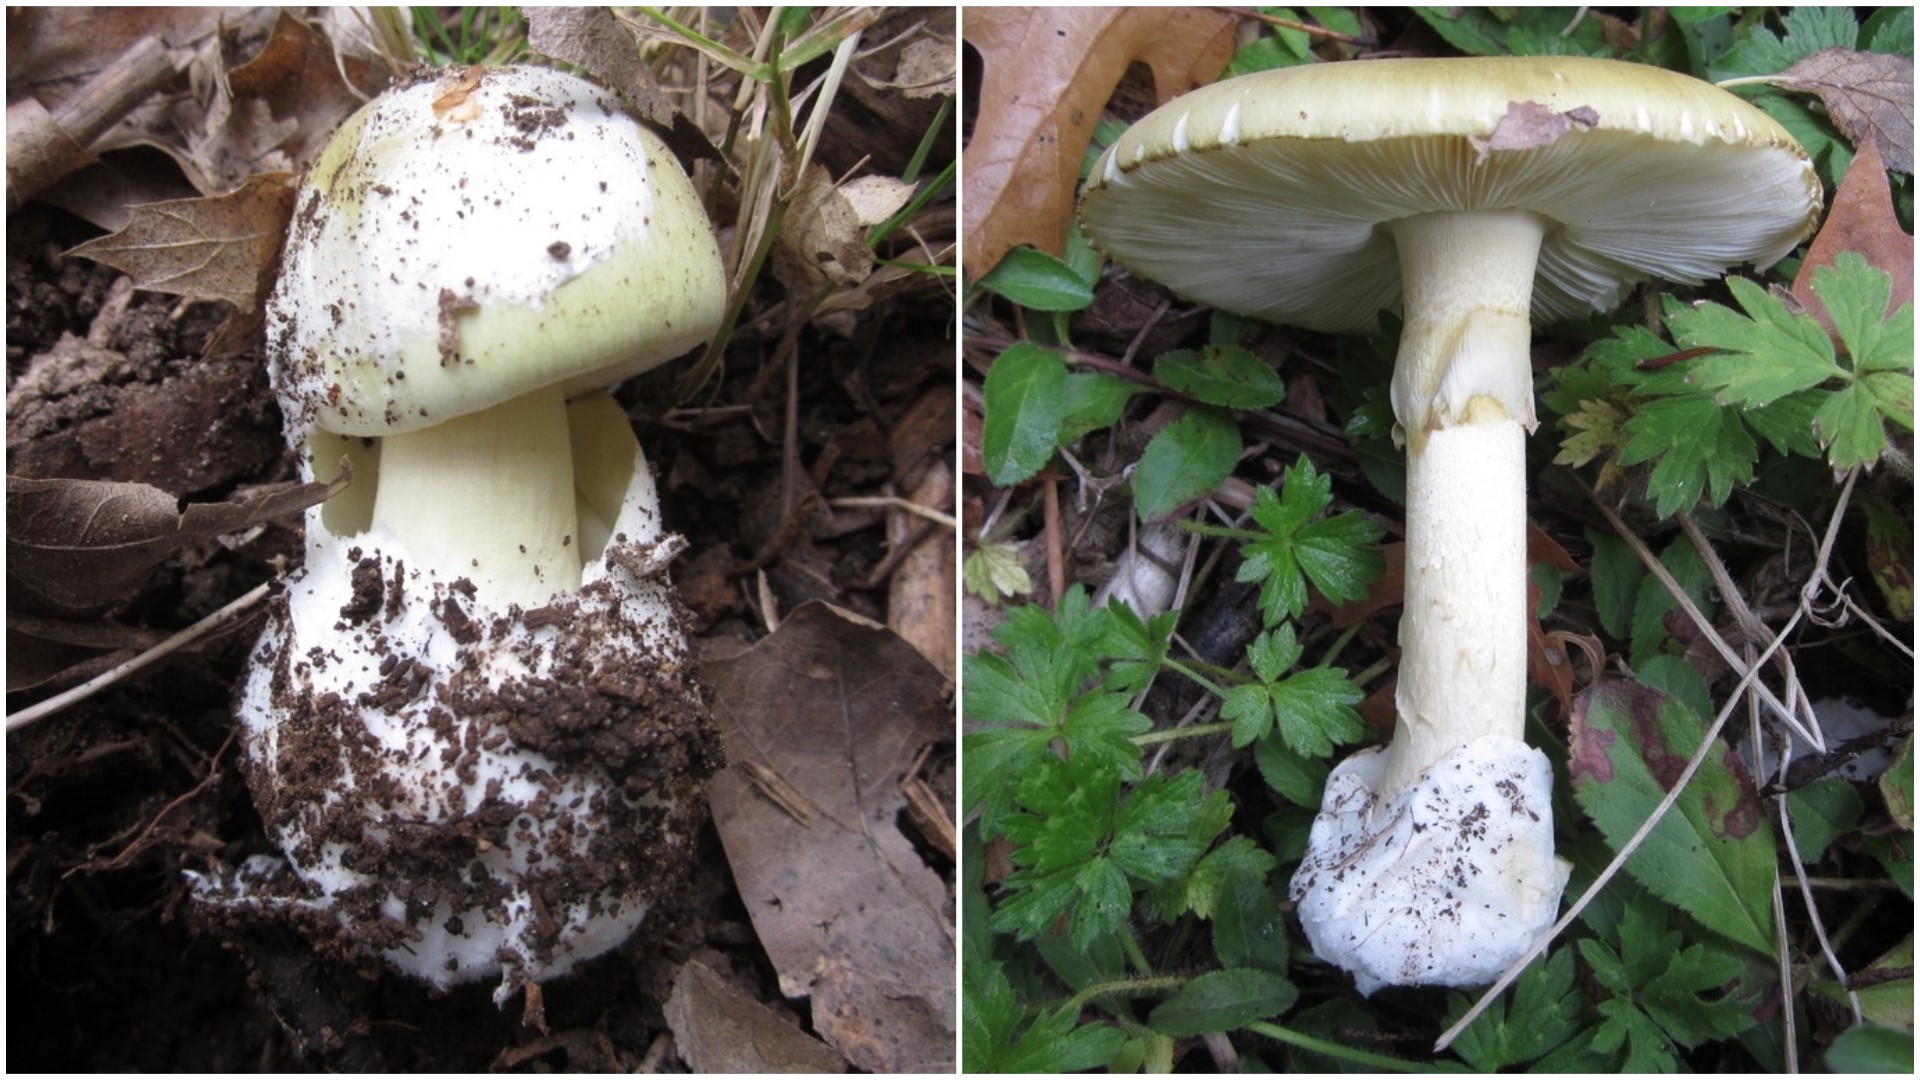 A poisonous and potentially deadly mushroom was found on the University of Washington Seattle campus.